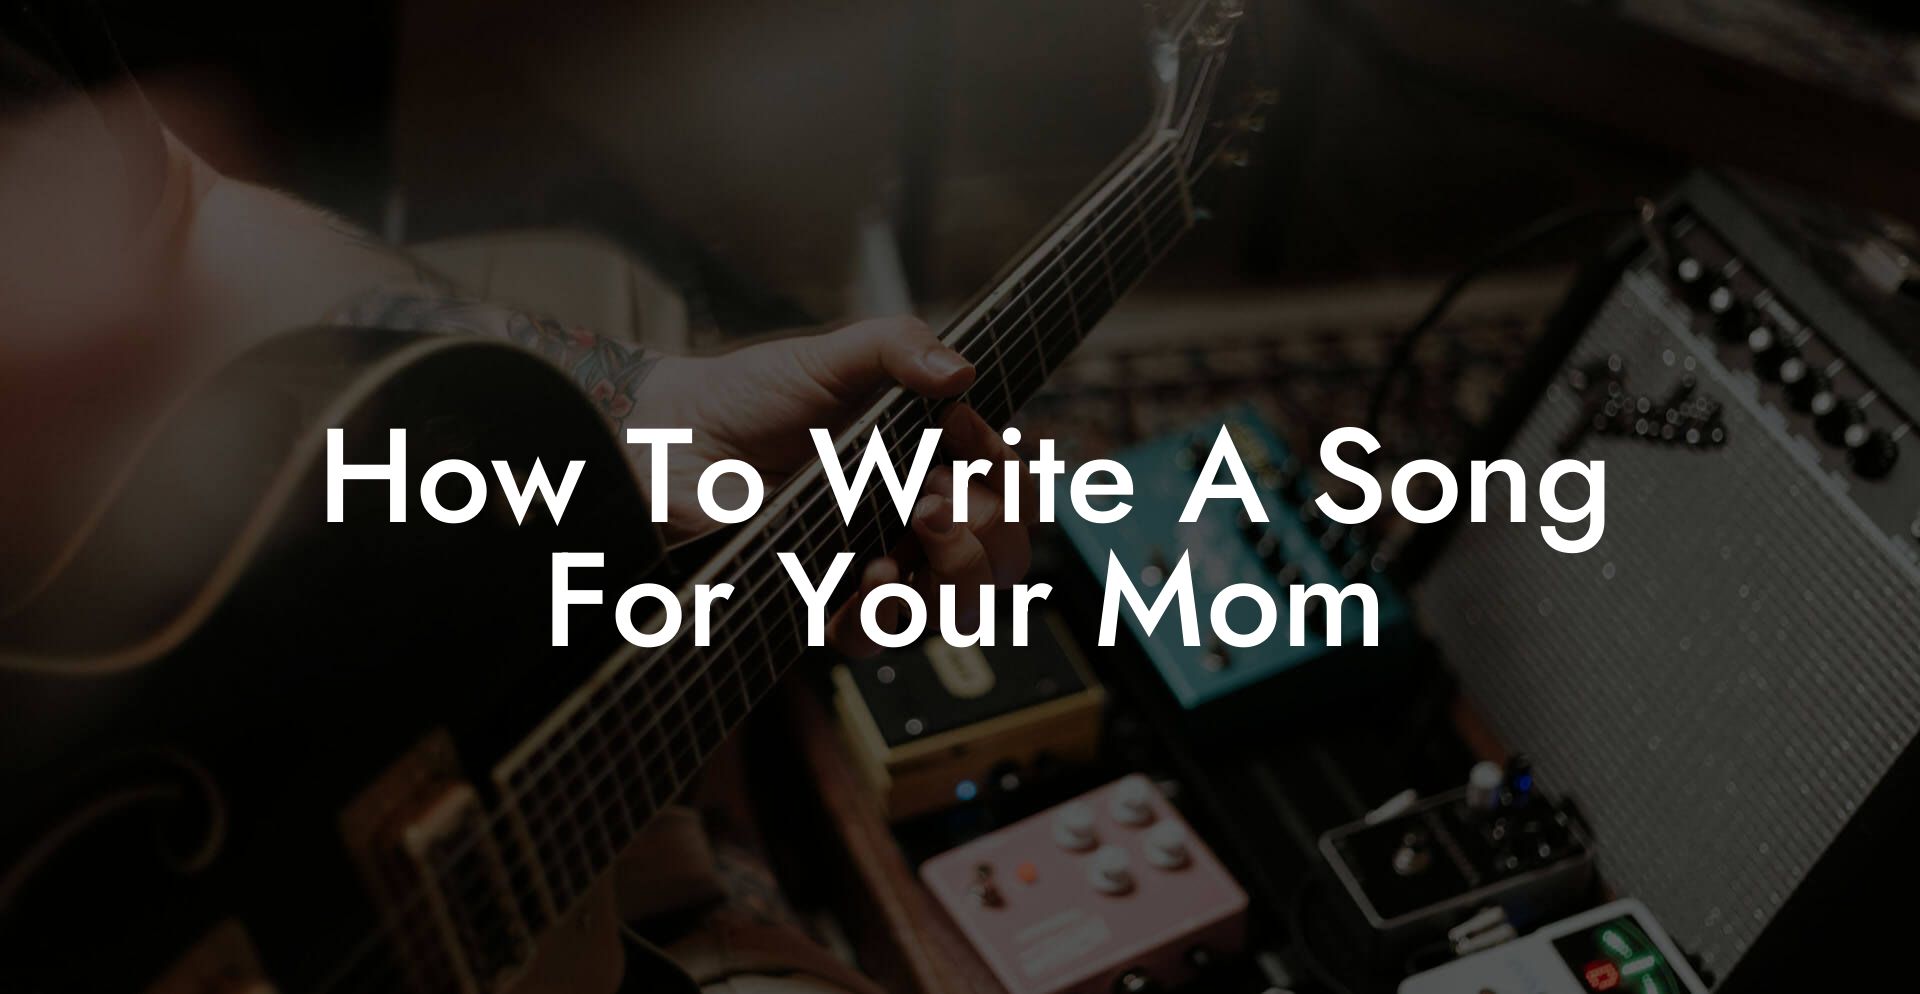 how to write a song for your mom lyric assistant